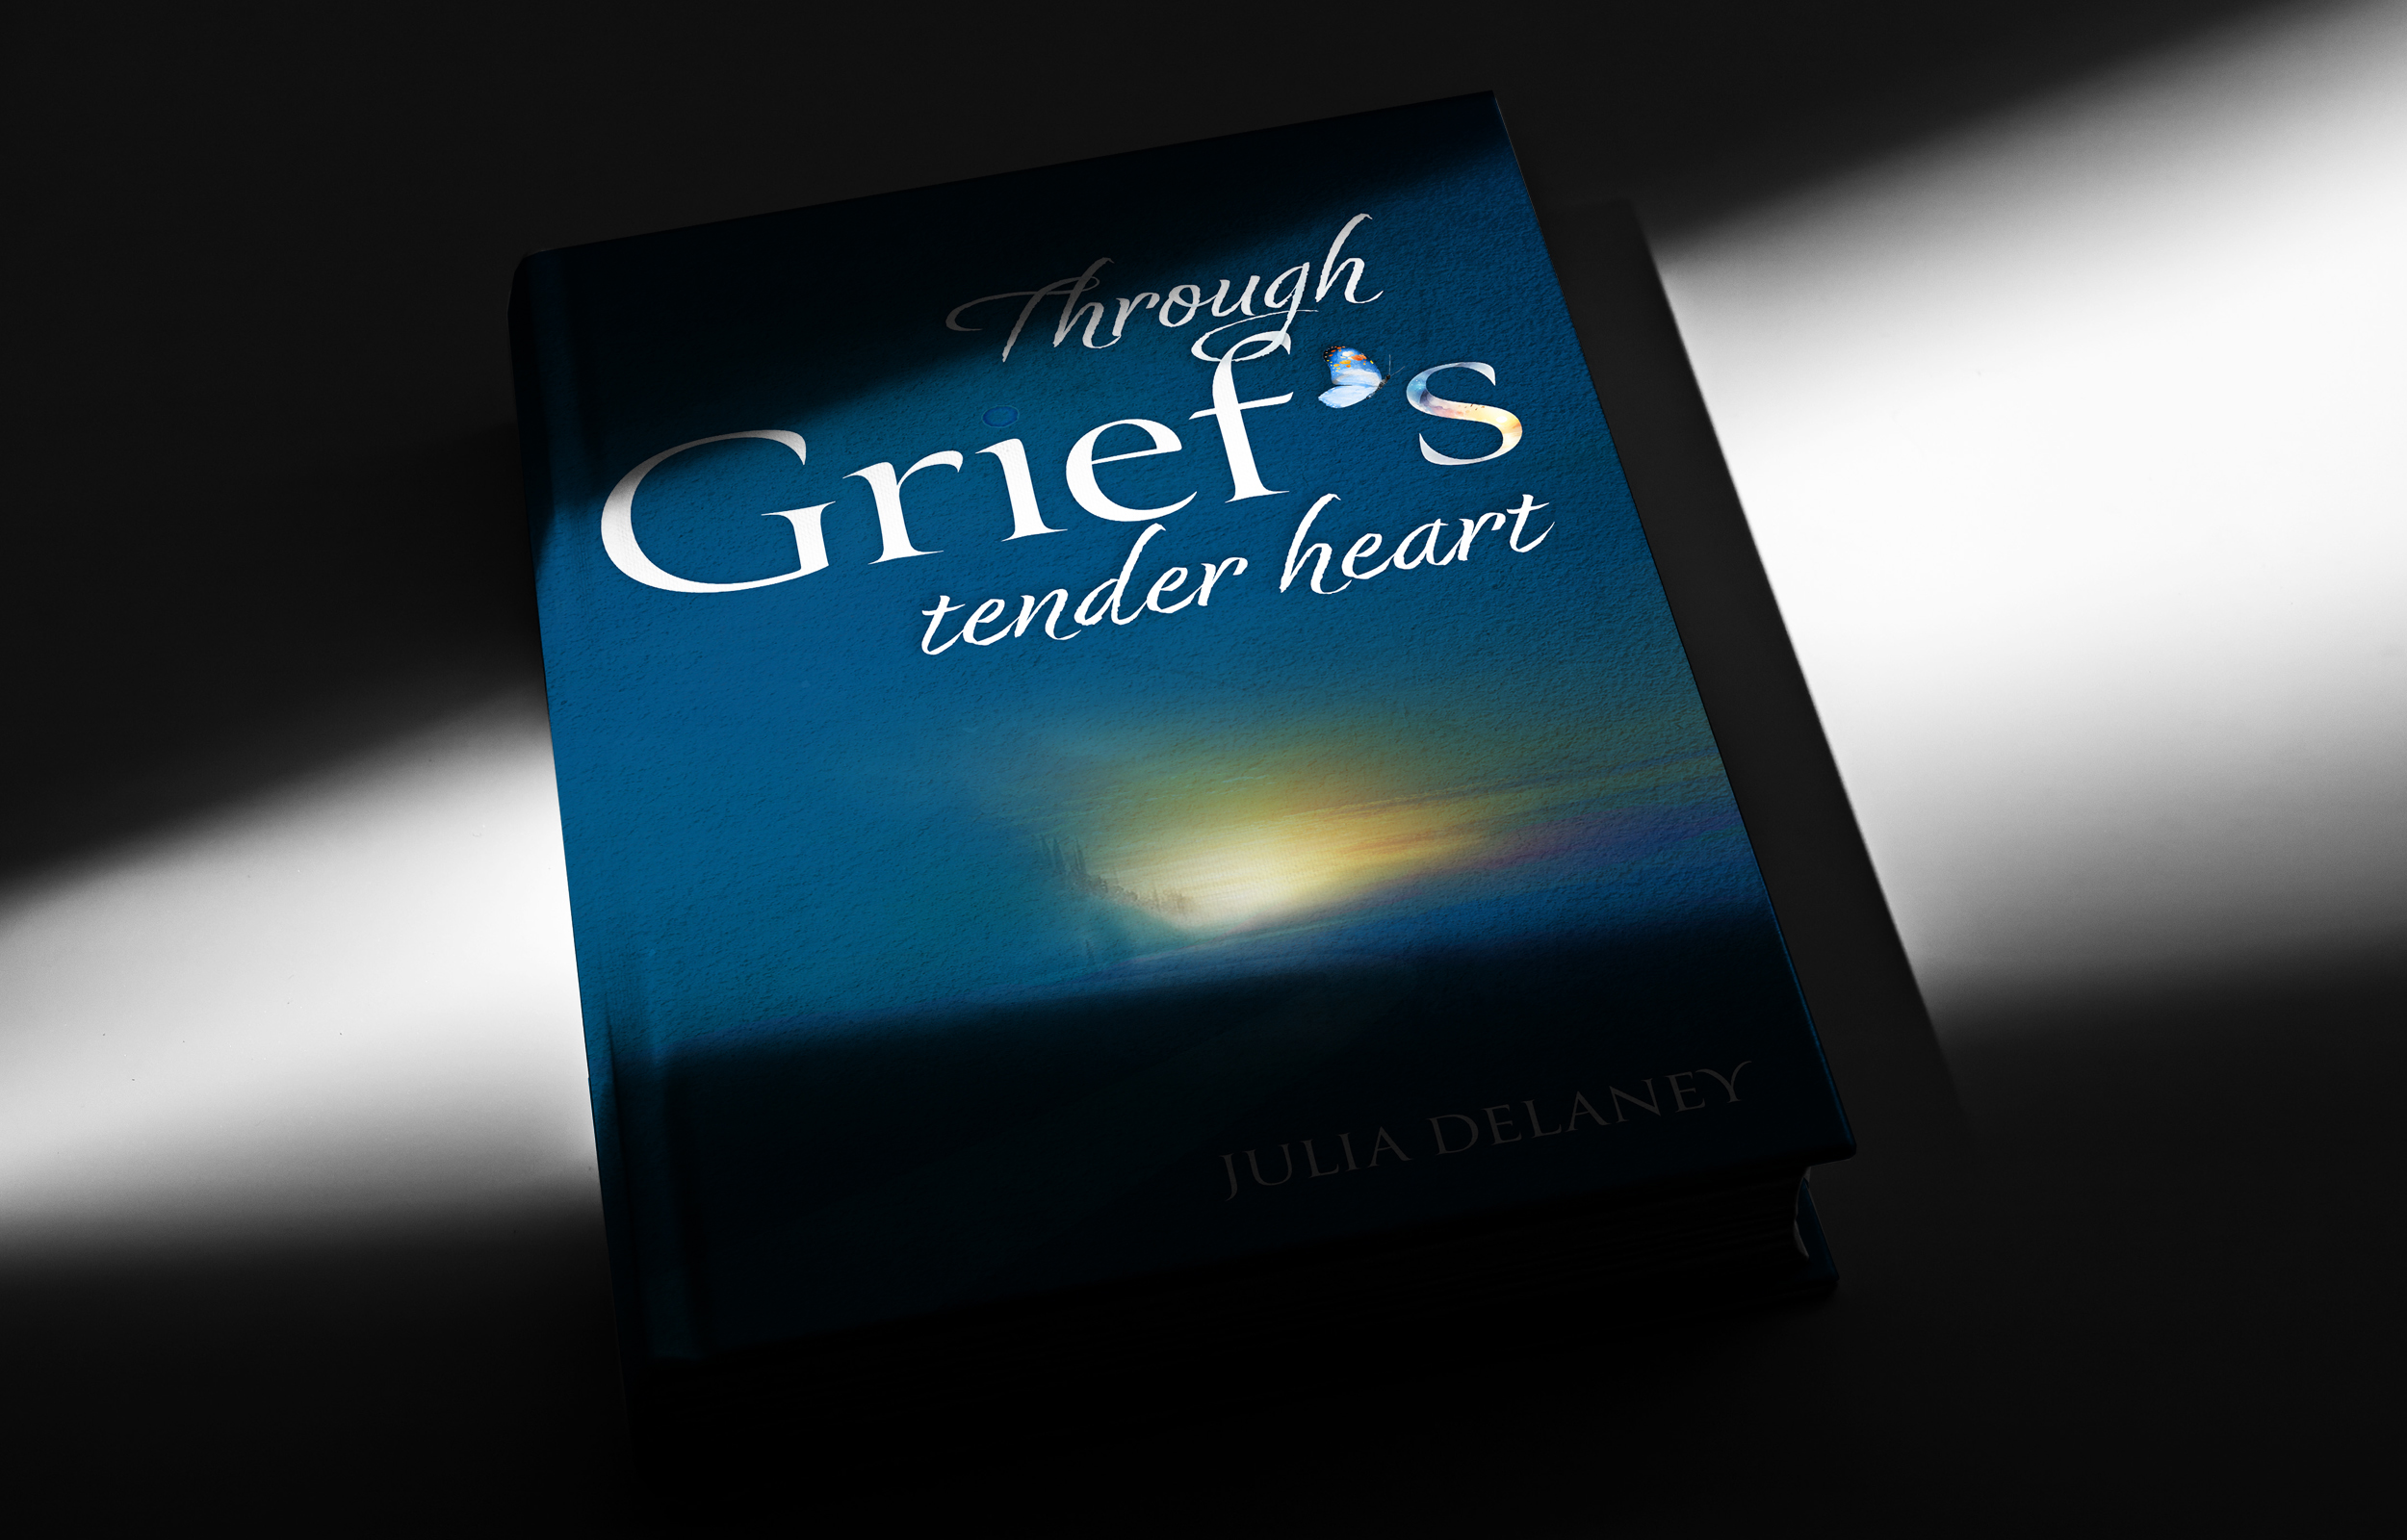 Julia Delaney; a book cover. The cover is predominantly a deep blue color that transitions from a darker shade at the top to a lighter tone at the bottom. There's a spotlight effect on the cover, highlighting the title and part of the image on the cover